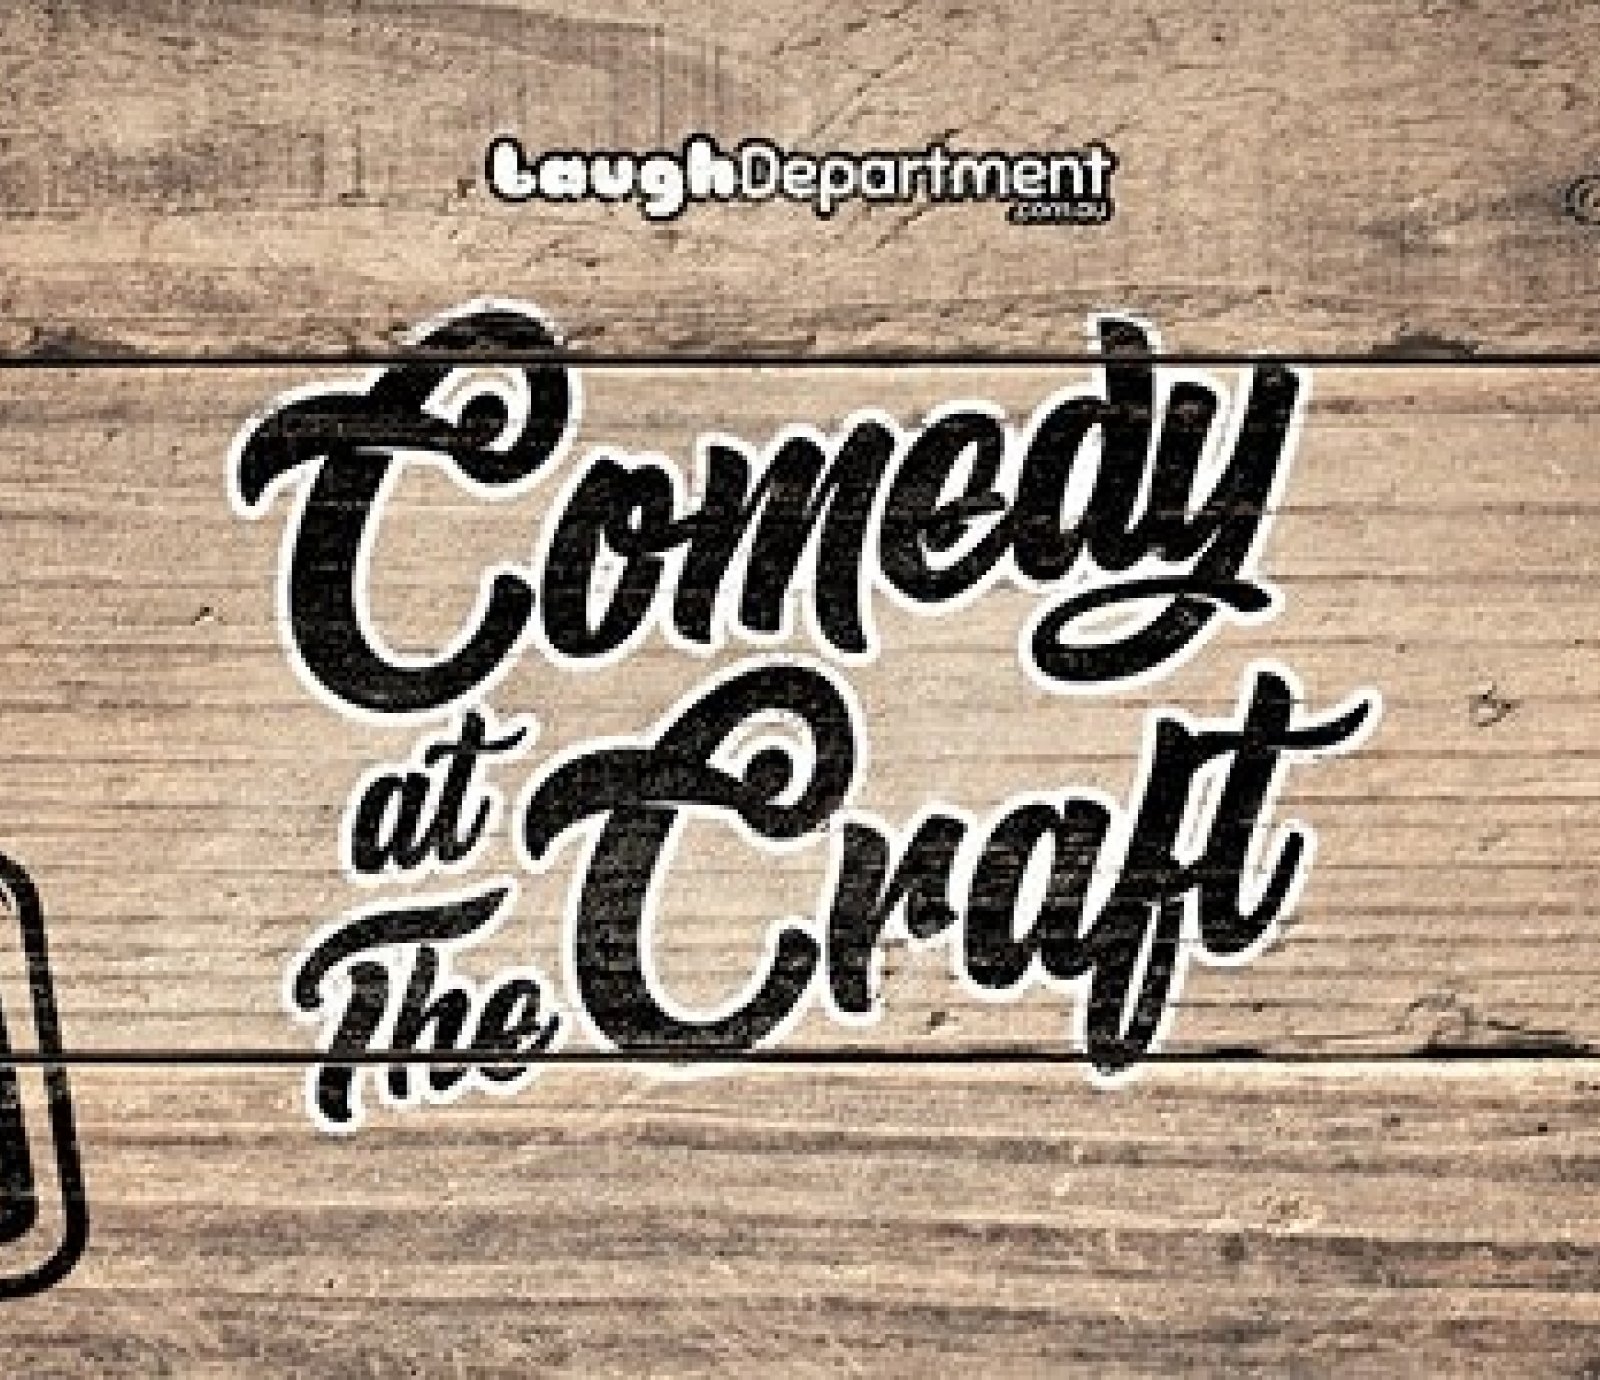 Comedy at The Craft 2021